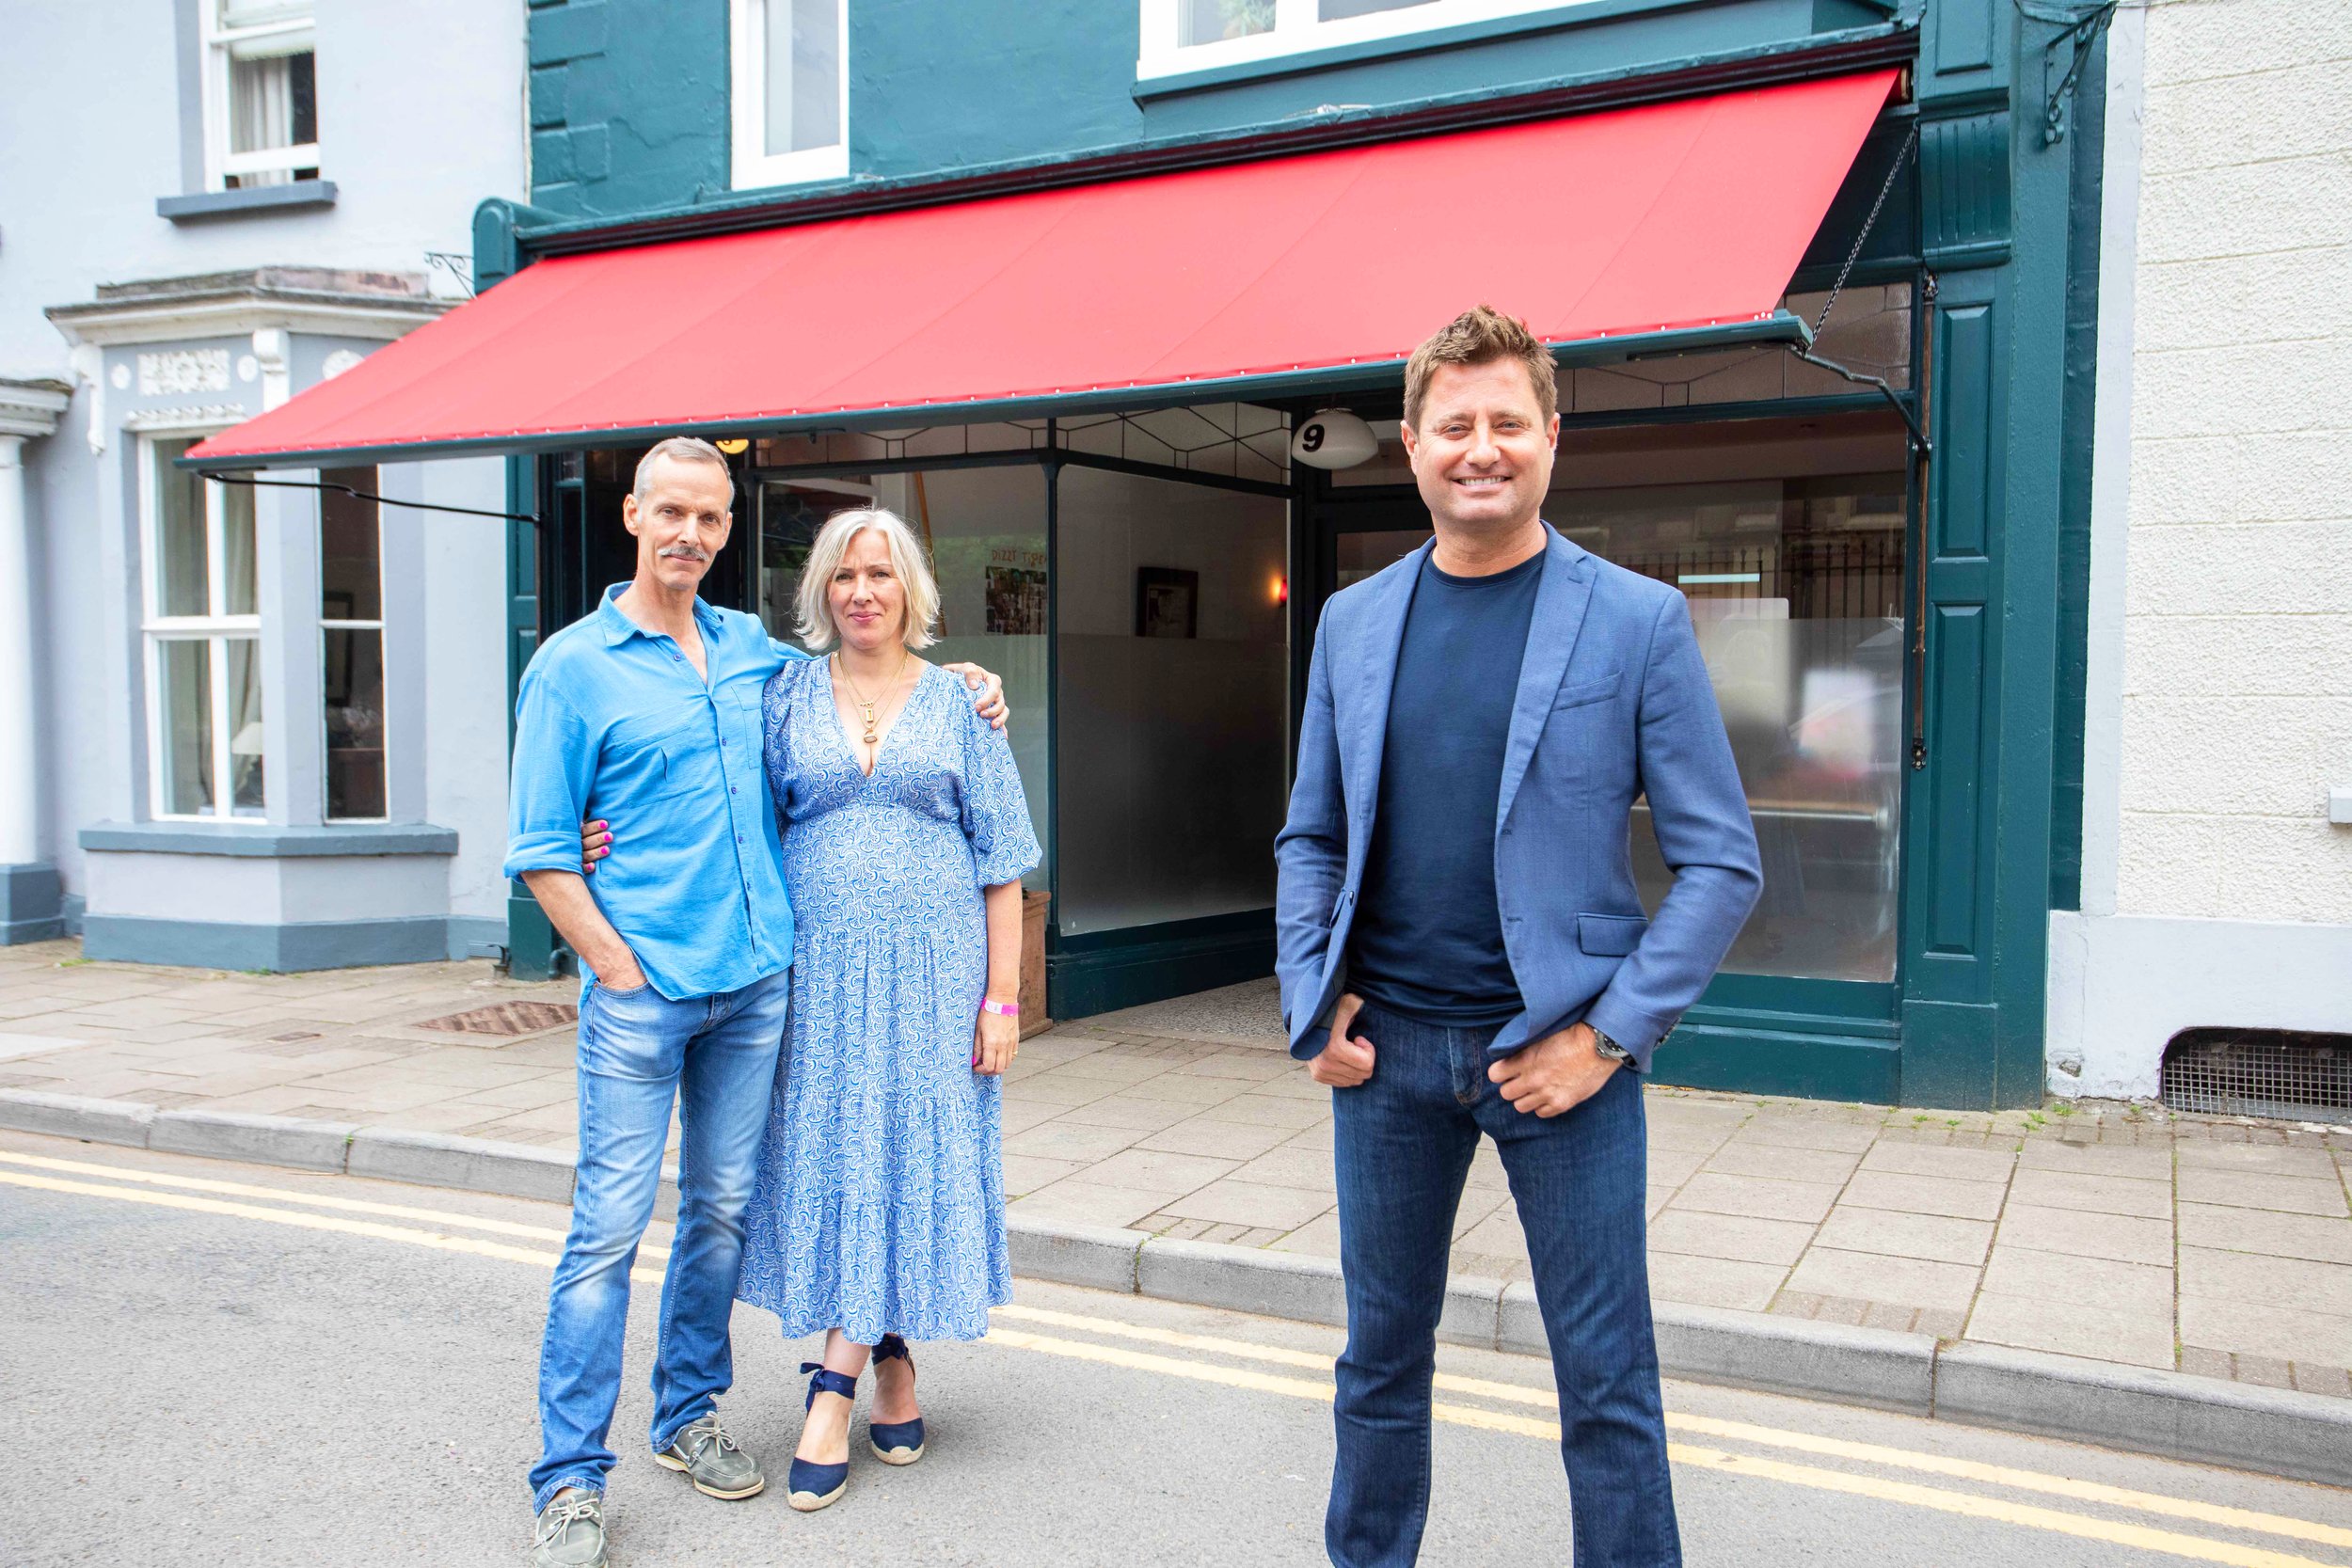 George Clarke's Remarkable Renovations Series 2 Episode 6 in Monmouthshire. Unit Stills Photographer Esme Buxton. 